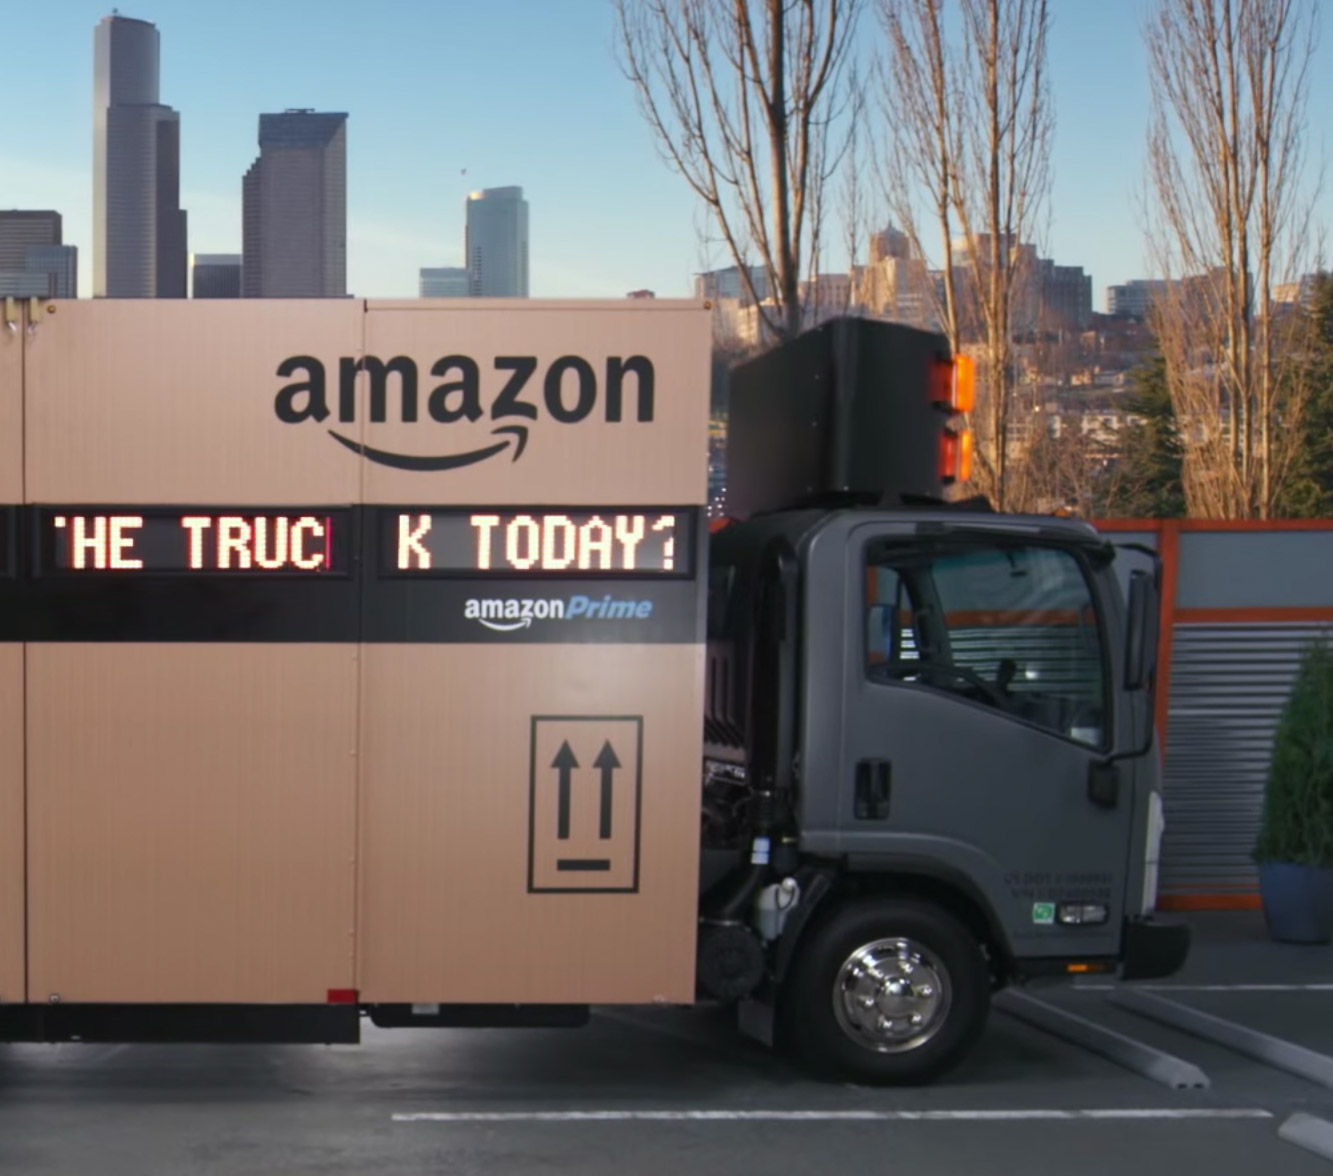 Amazon’s Treasure Truck Is Like An Ice Cream Truck For Paddleboards And Steaks